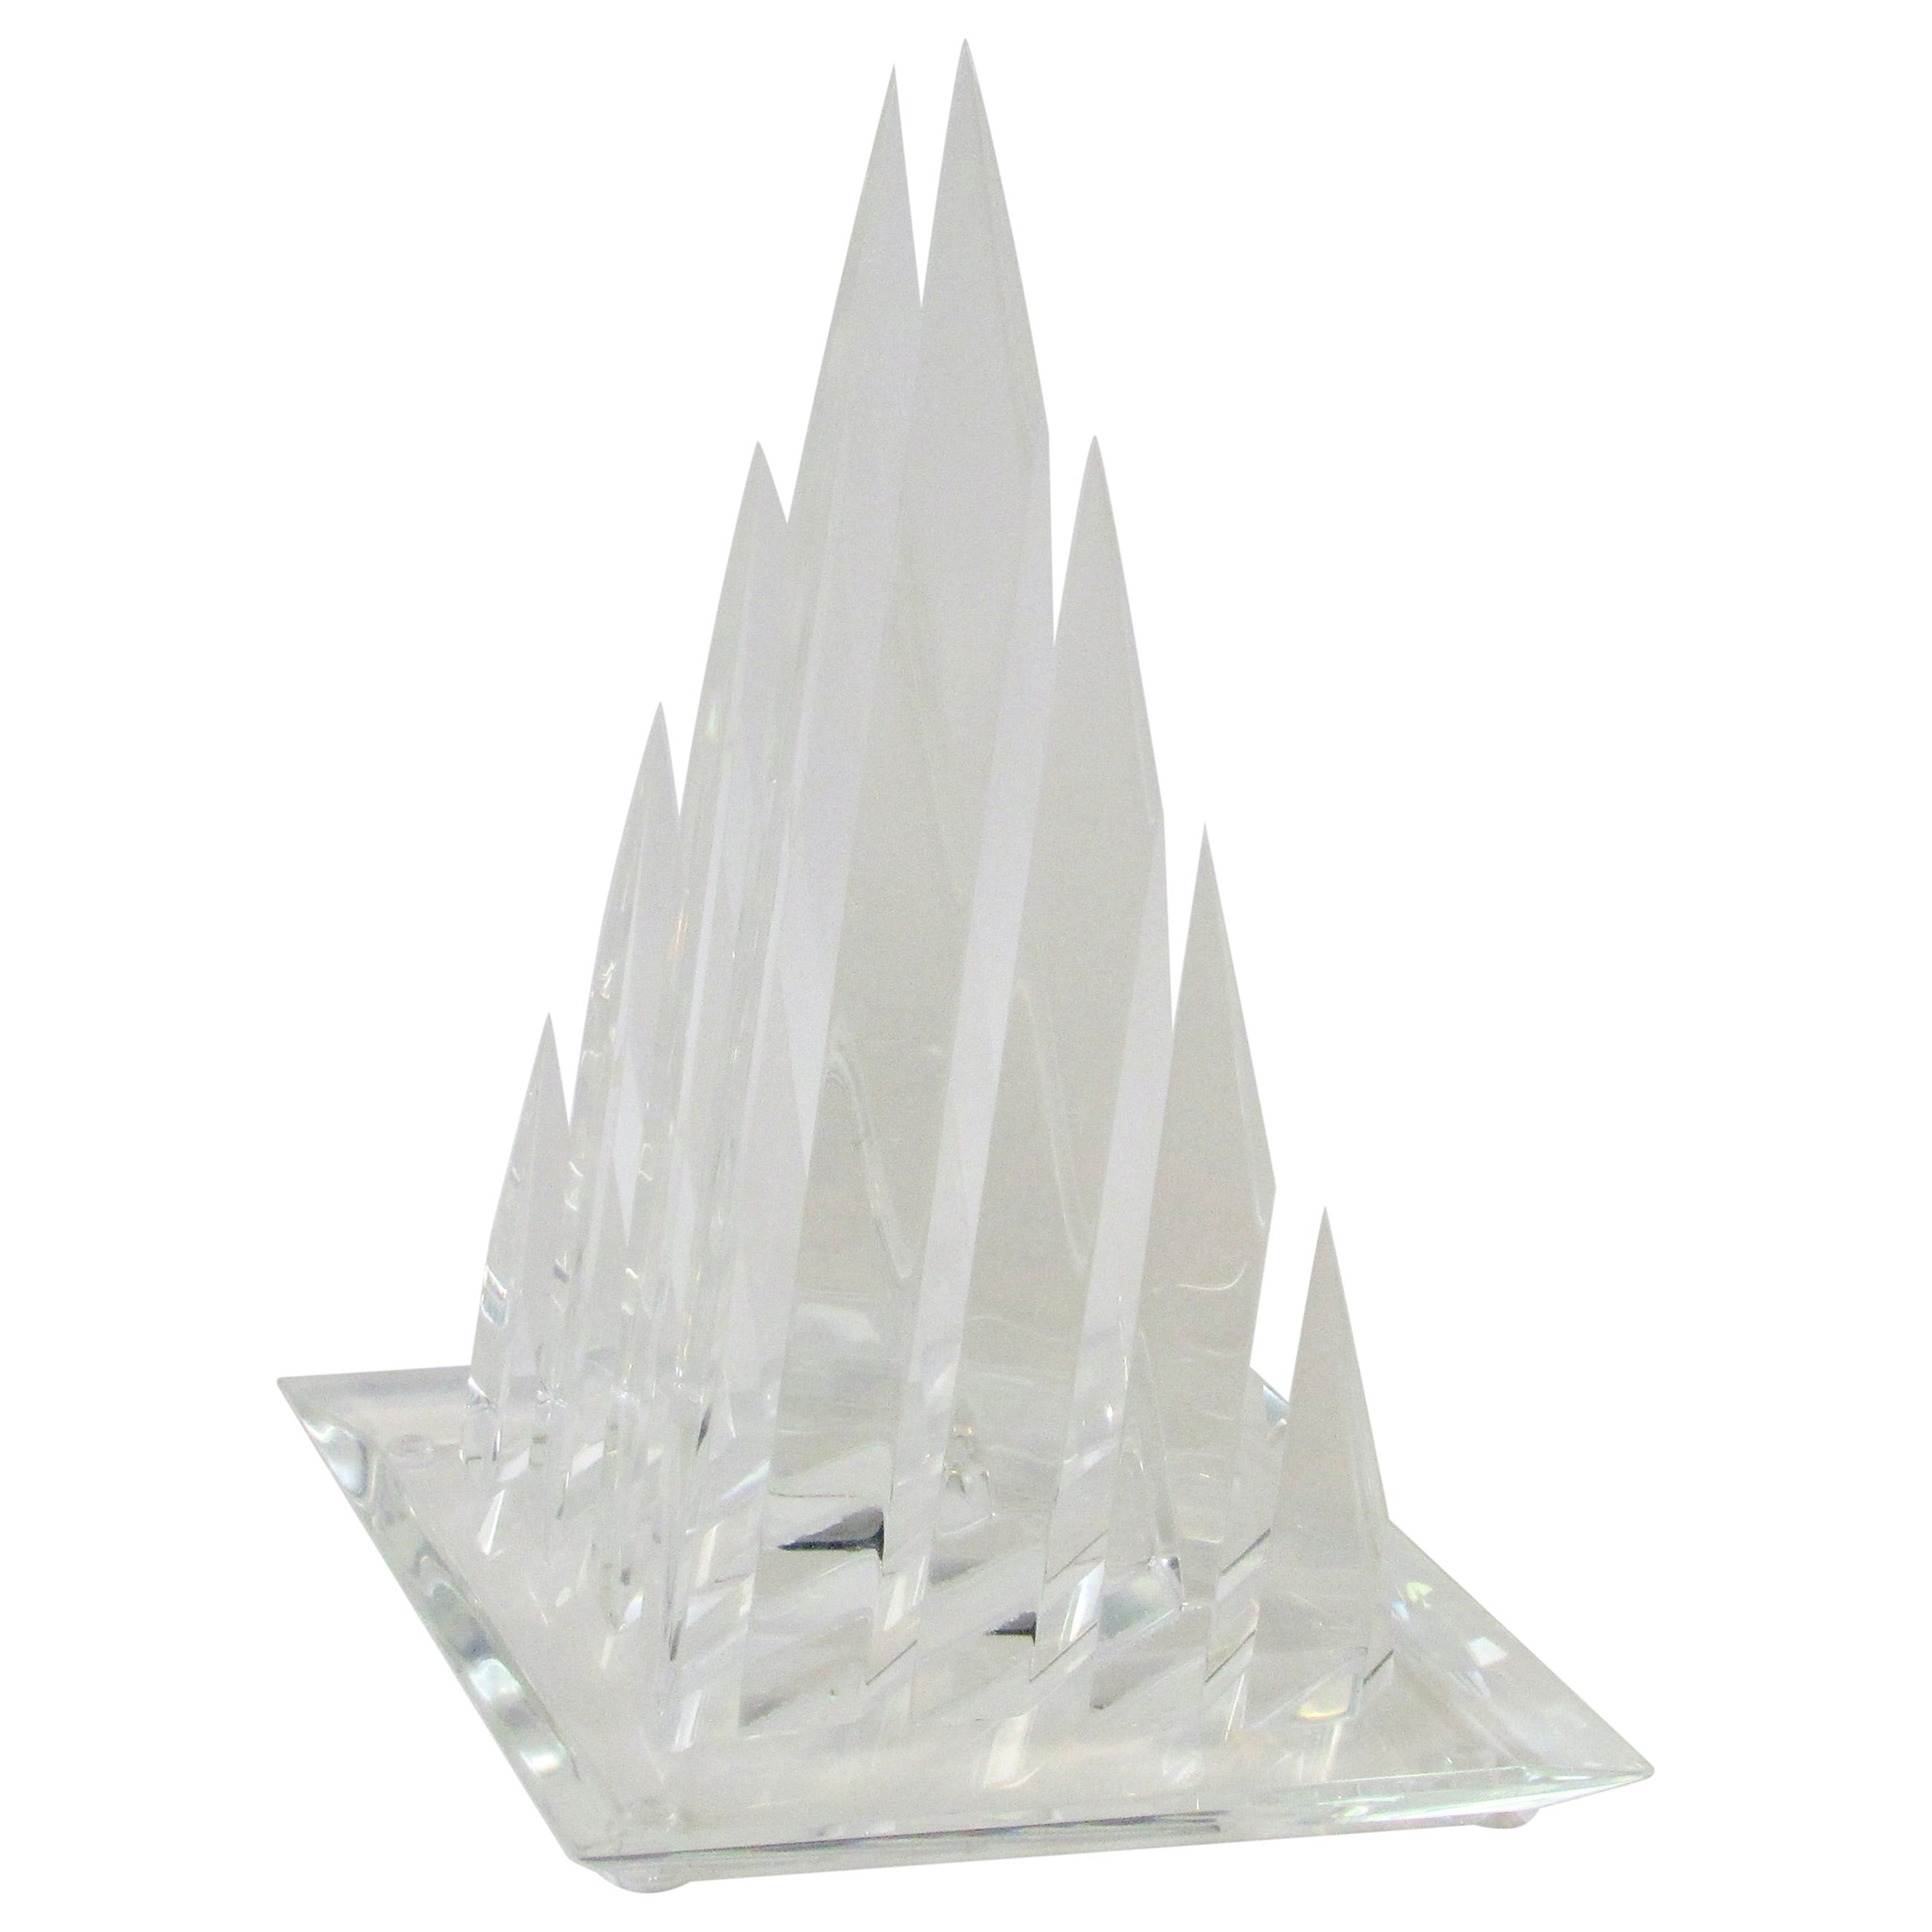 Hivo Van Teal Segmented Lucite Pyramid, Triangle Sculpture For Sale